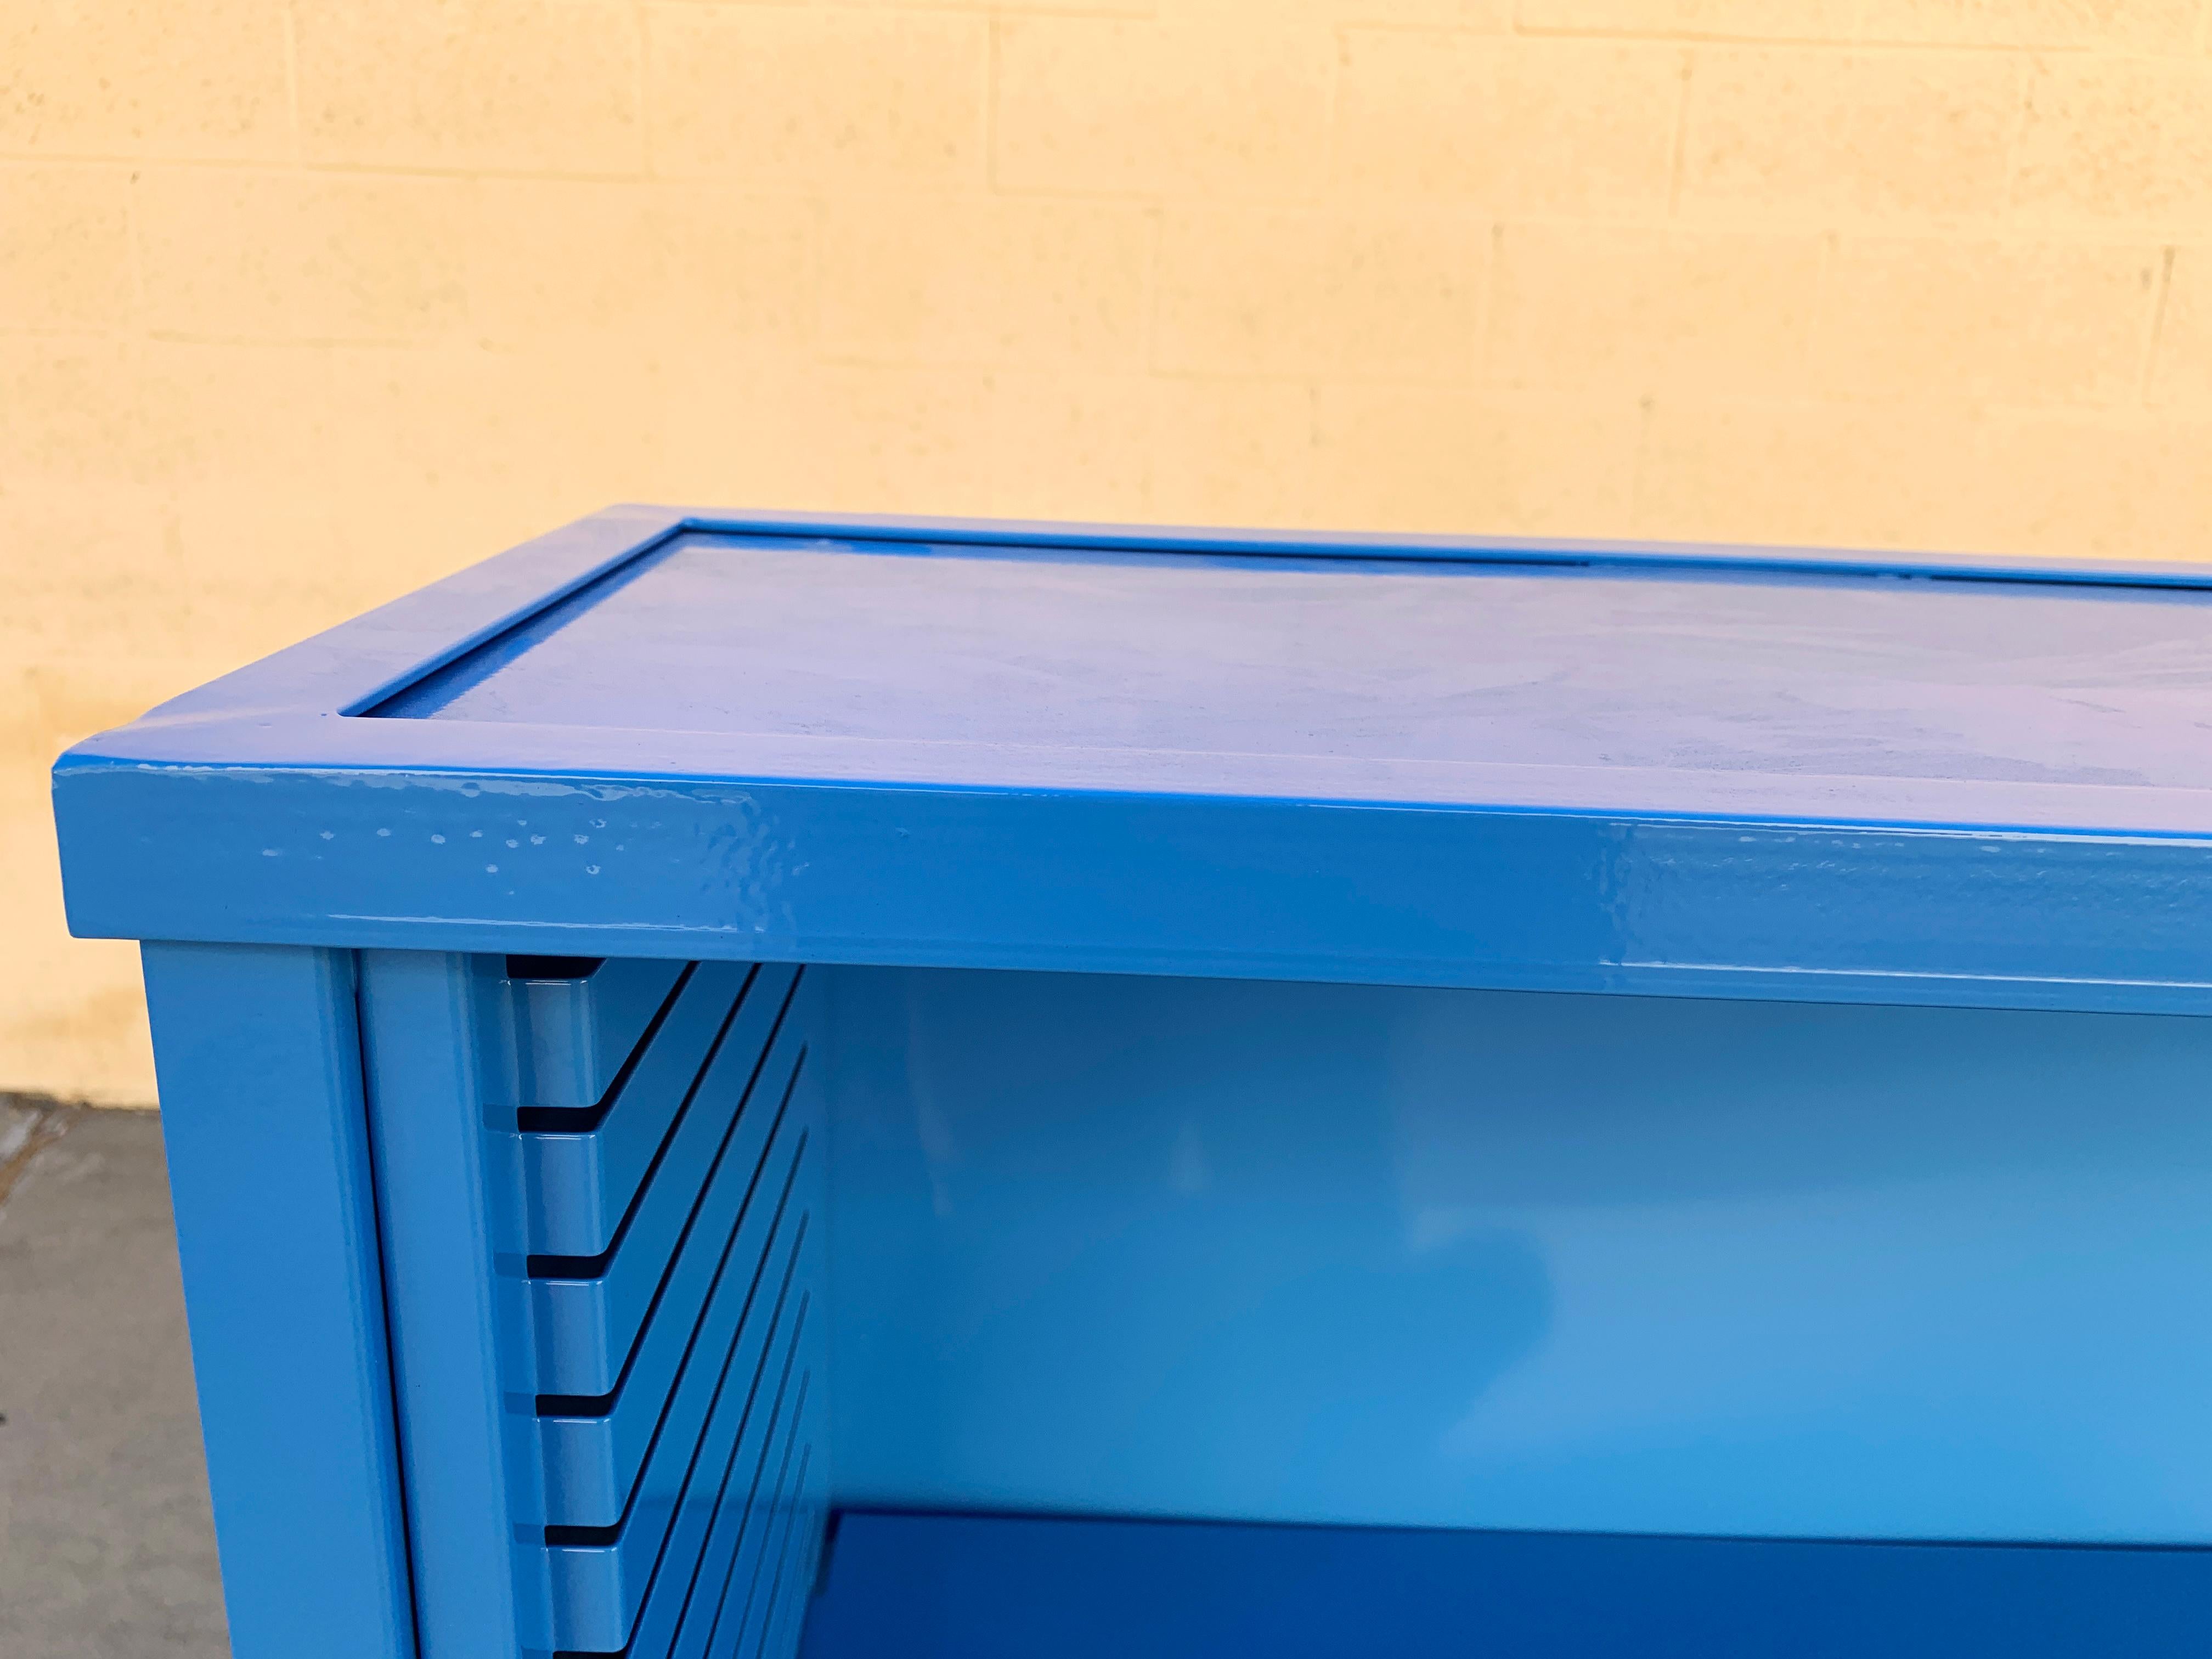 American 1960s Steel Tanker Style Bookcase in Blue ‘BL05’, Custom Refinished For Sale